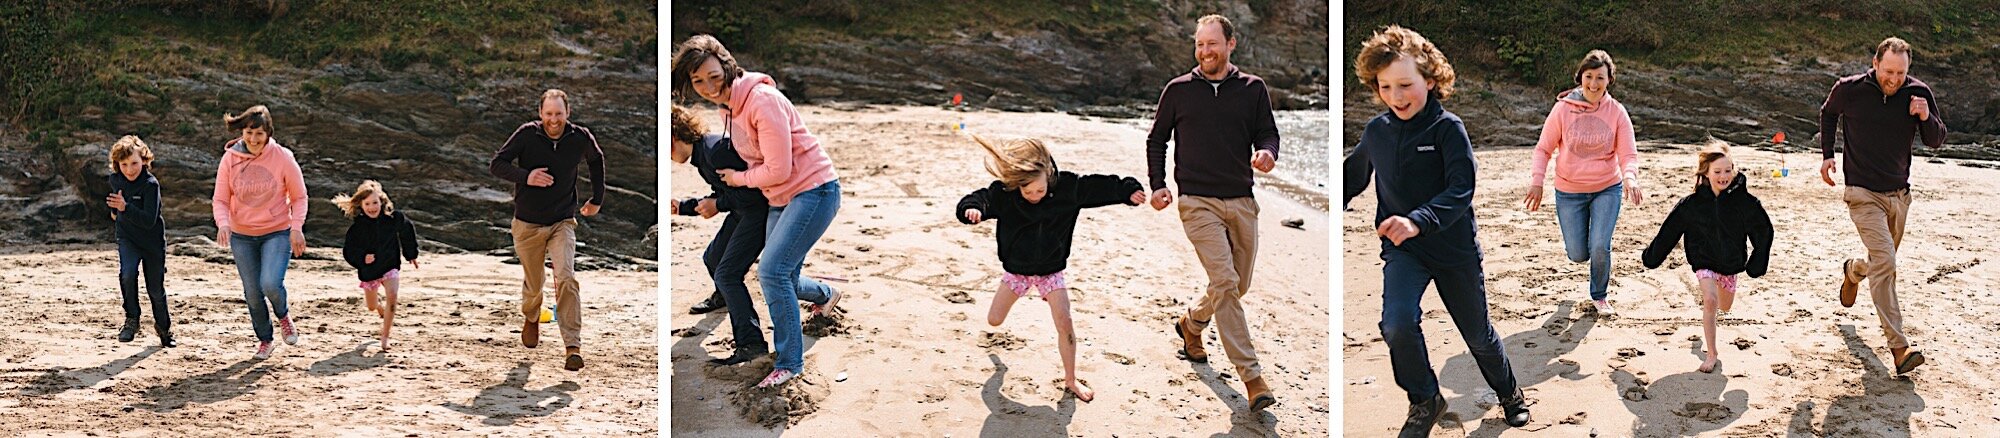 Family Photographer Devon_Relaxed natural Family Shoot_ Mothecombe Beach__Freckle Photography_008.jpg